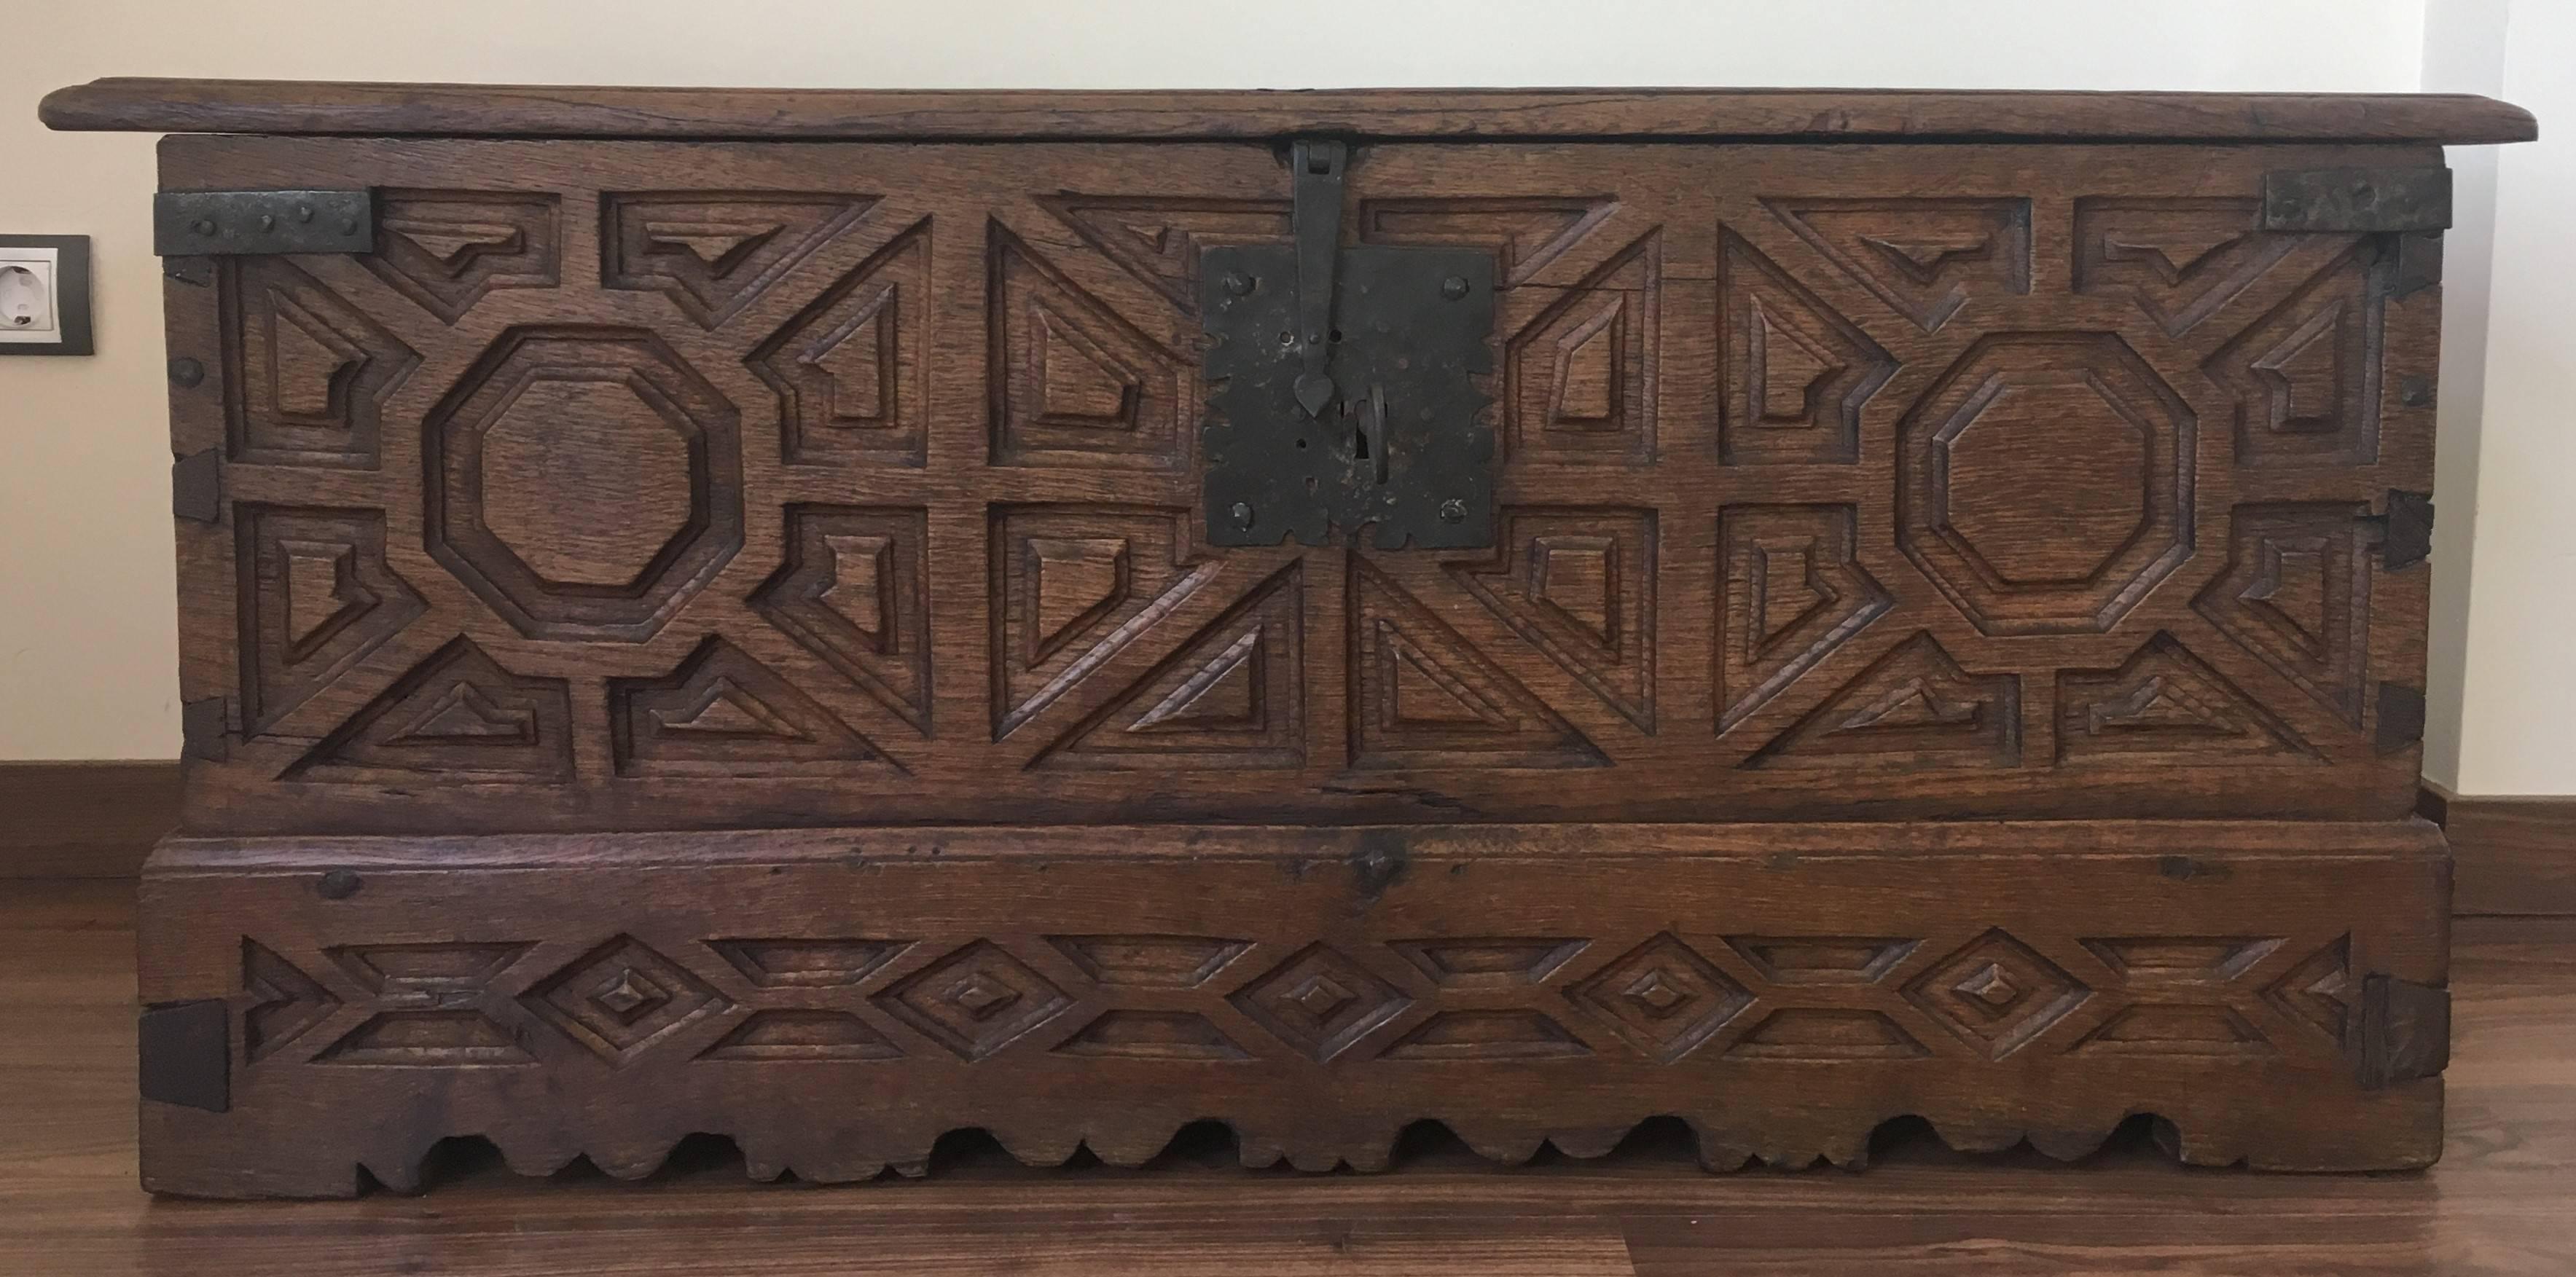 A Spanish 18th century wood coffer. This Spanish trunk from the 18th century features beautifully visible dovetail joints down each corner side and a scalloped skirt which is adorned with geometrical carvings. The trunk's interior offers a large